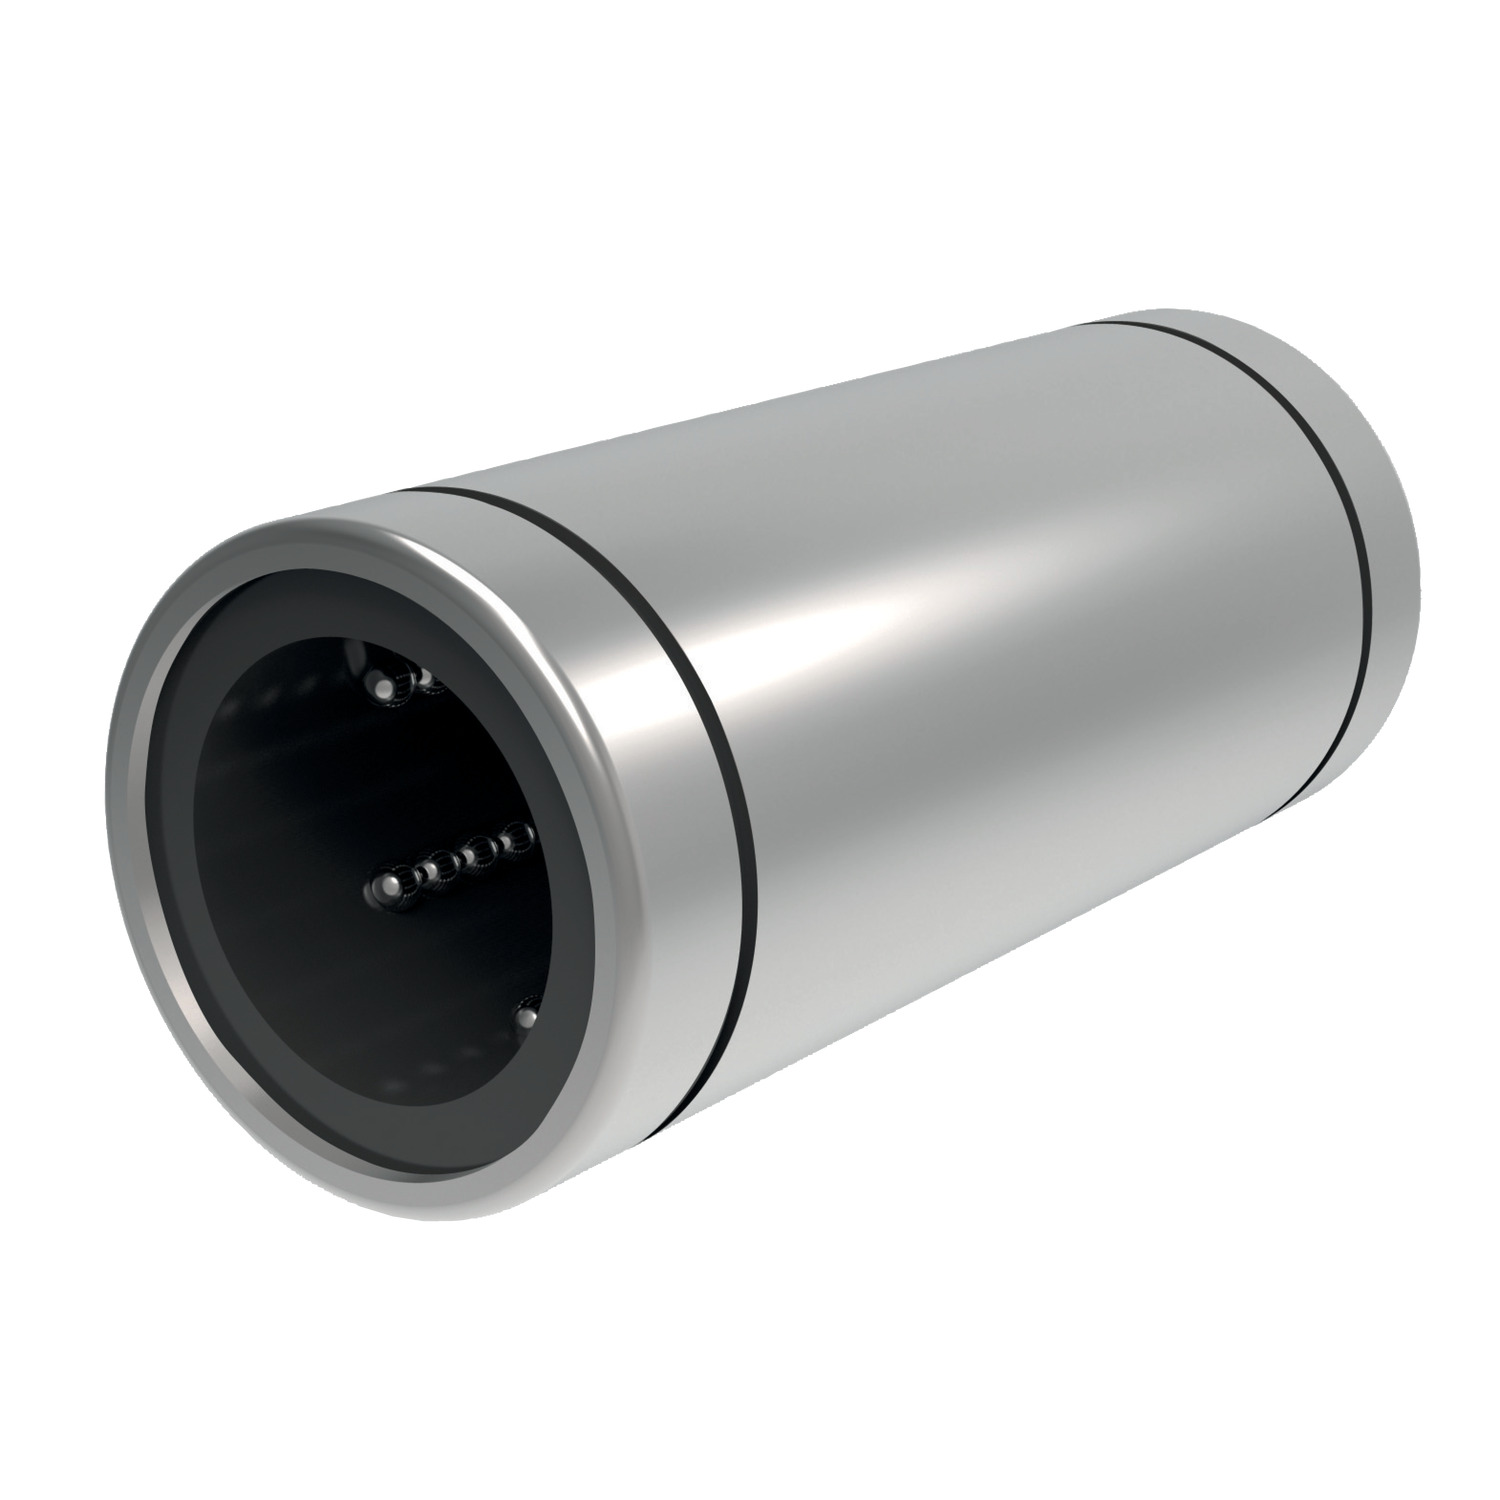 Long Linear Ball Bushings For use with hardened shafts only, steel ball retainers can be supplied for higher temperature applications up to 120 ℃.